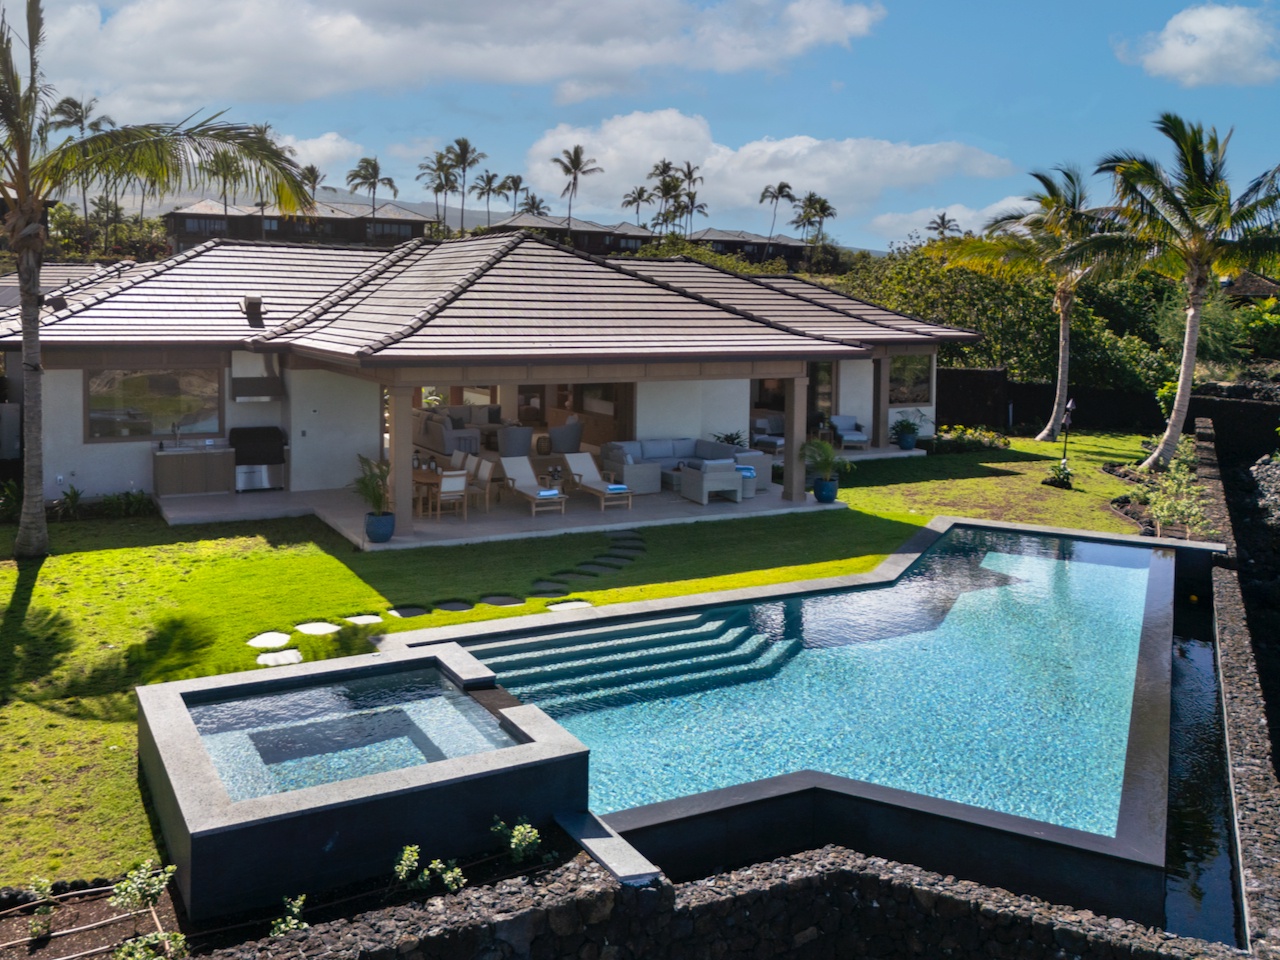 Kailua Kona Vacation Rentals, 4BR Luxury Puka Pa Estate (1201) at Four Seasons Resort at Hualalai - Large pool with spa, a lush private lawn and an inviting outdoor living spaces for the perfect vacation.